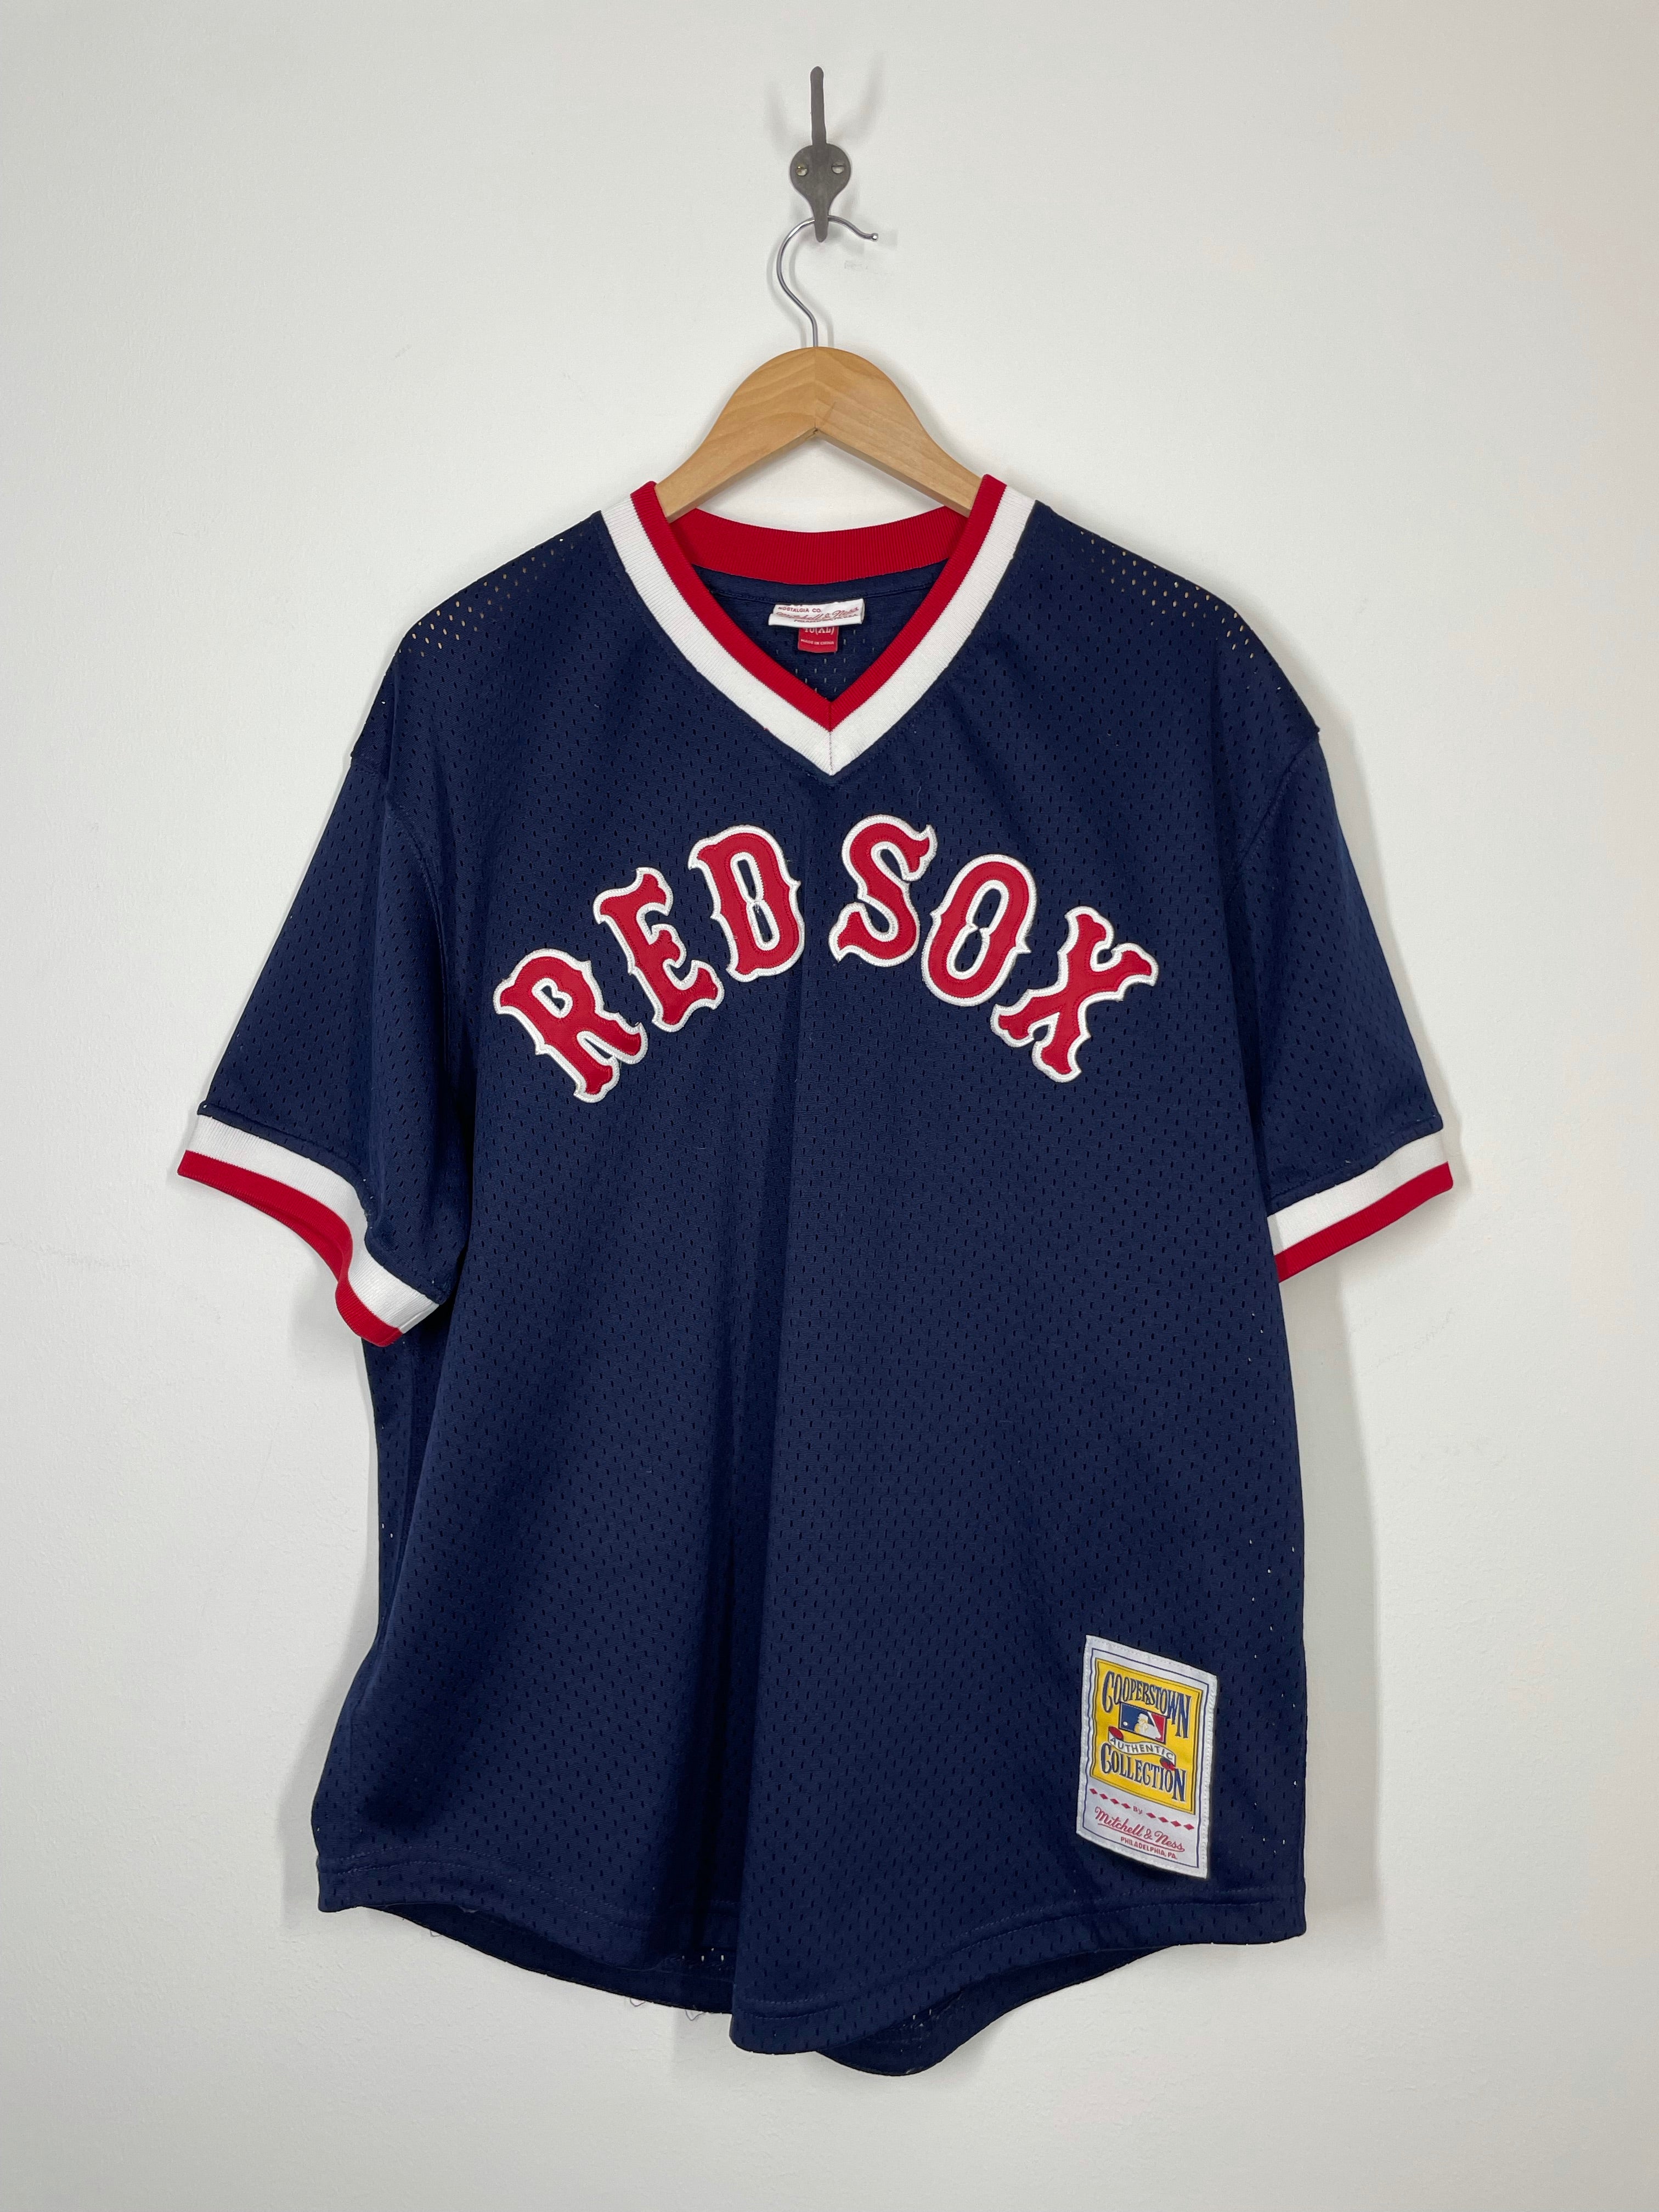 Men's Nike Ted Williams Navy Boston Red Sox Cooperstown Collection Name &  Number T-Shirt